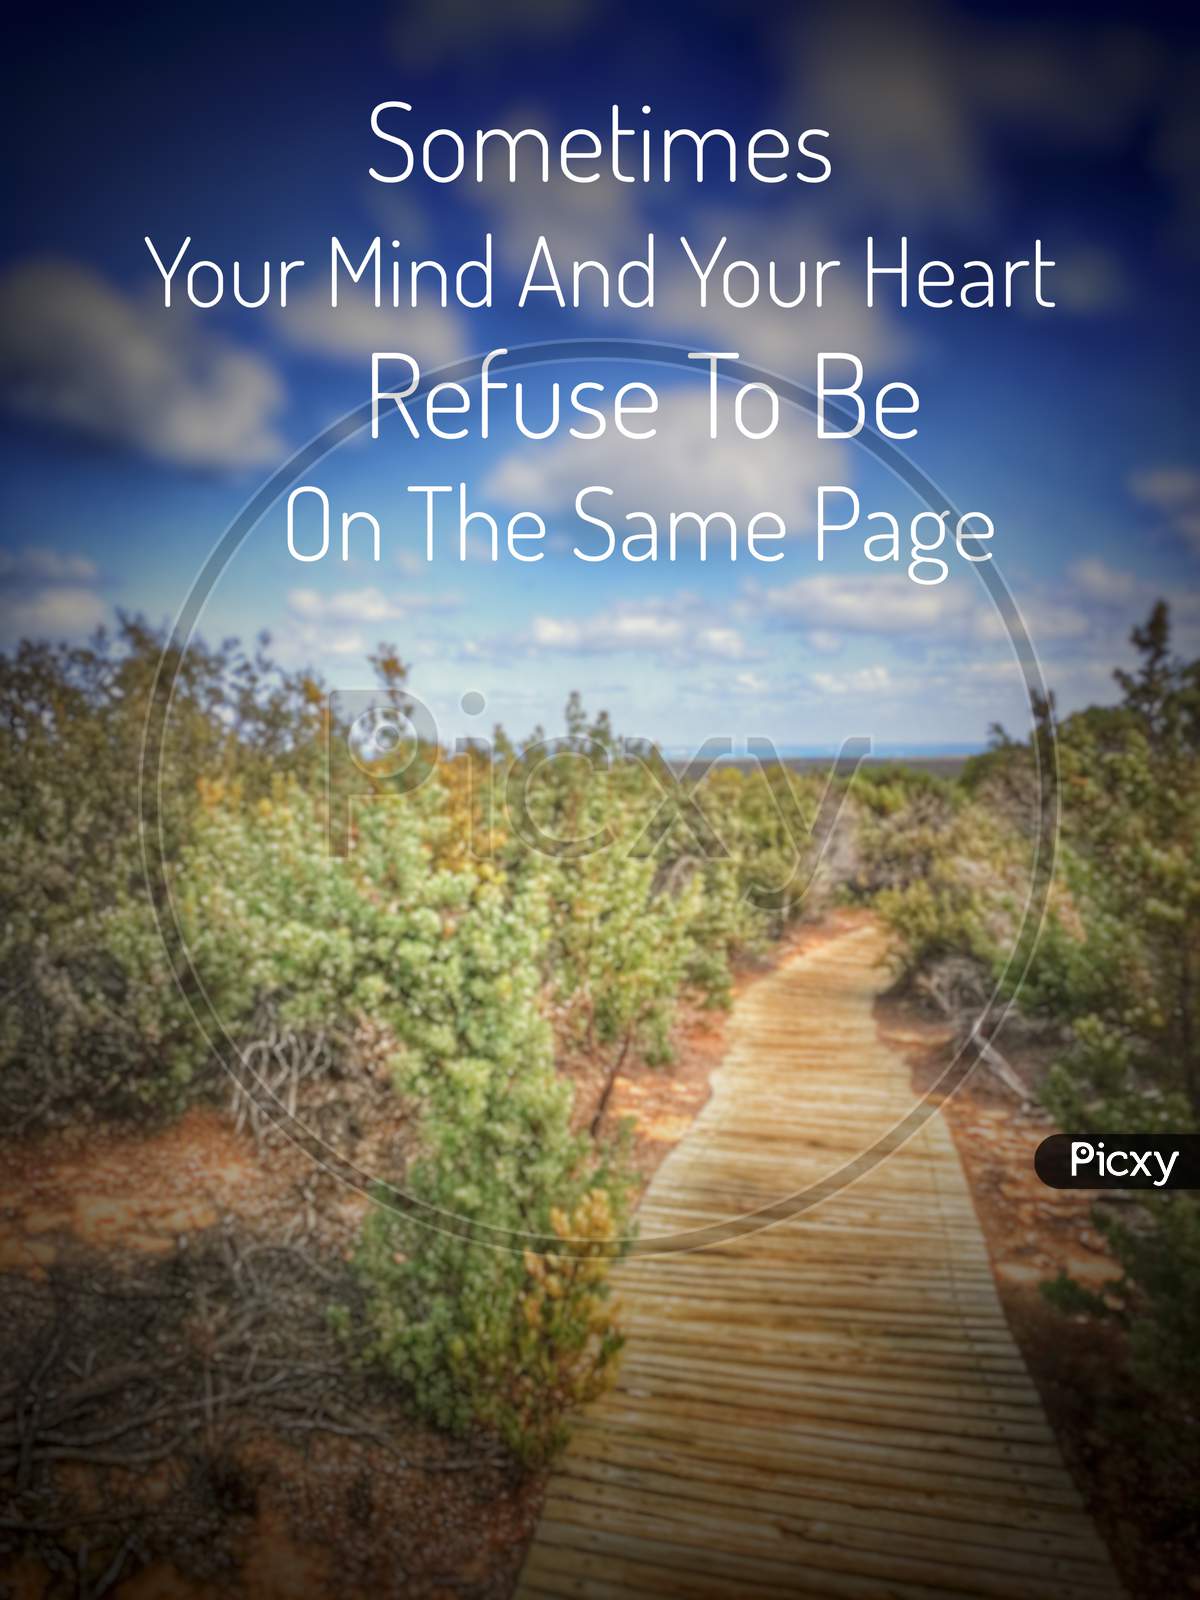 Inspirational and motivational quote - Sometimes your mind and your heart refuse to be on the same page